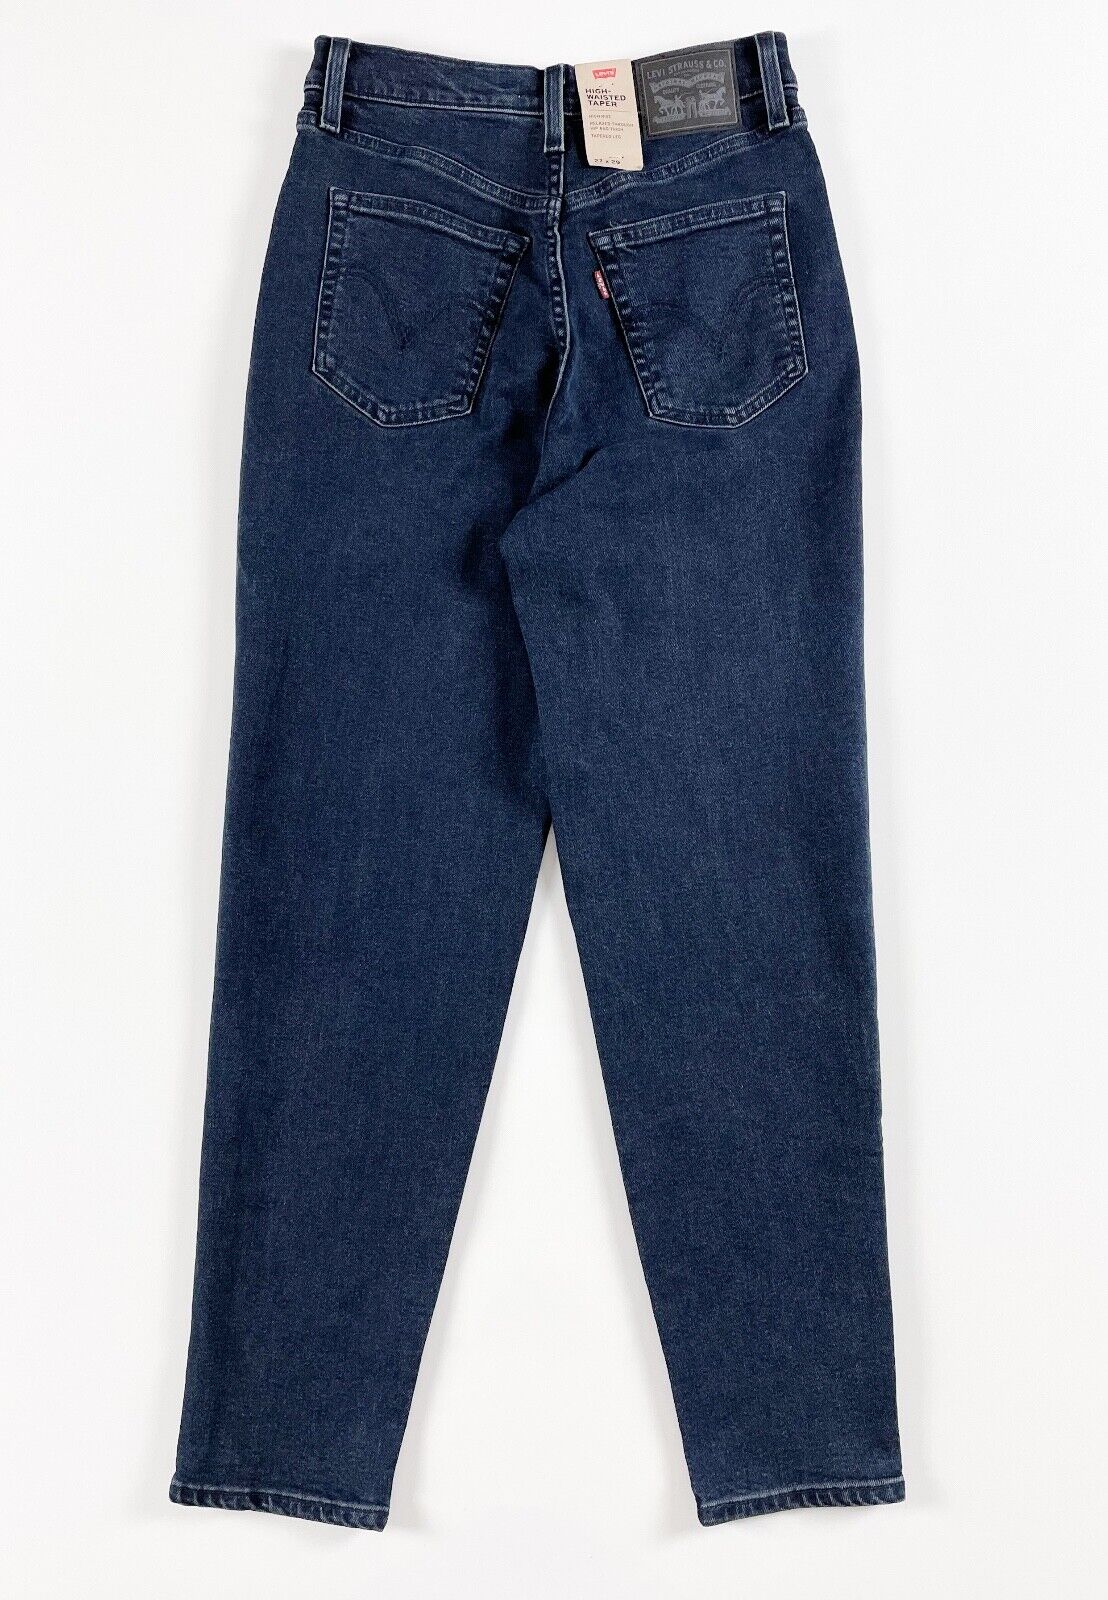 Levi’s High Waisted Taper Jeans Women’s Ankle Length Bruised Ego Blue  26986-0004